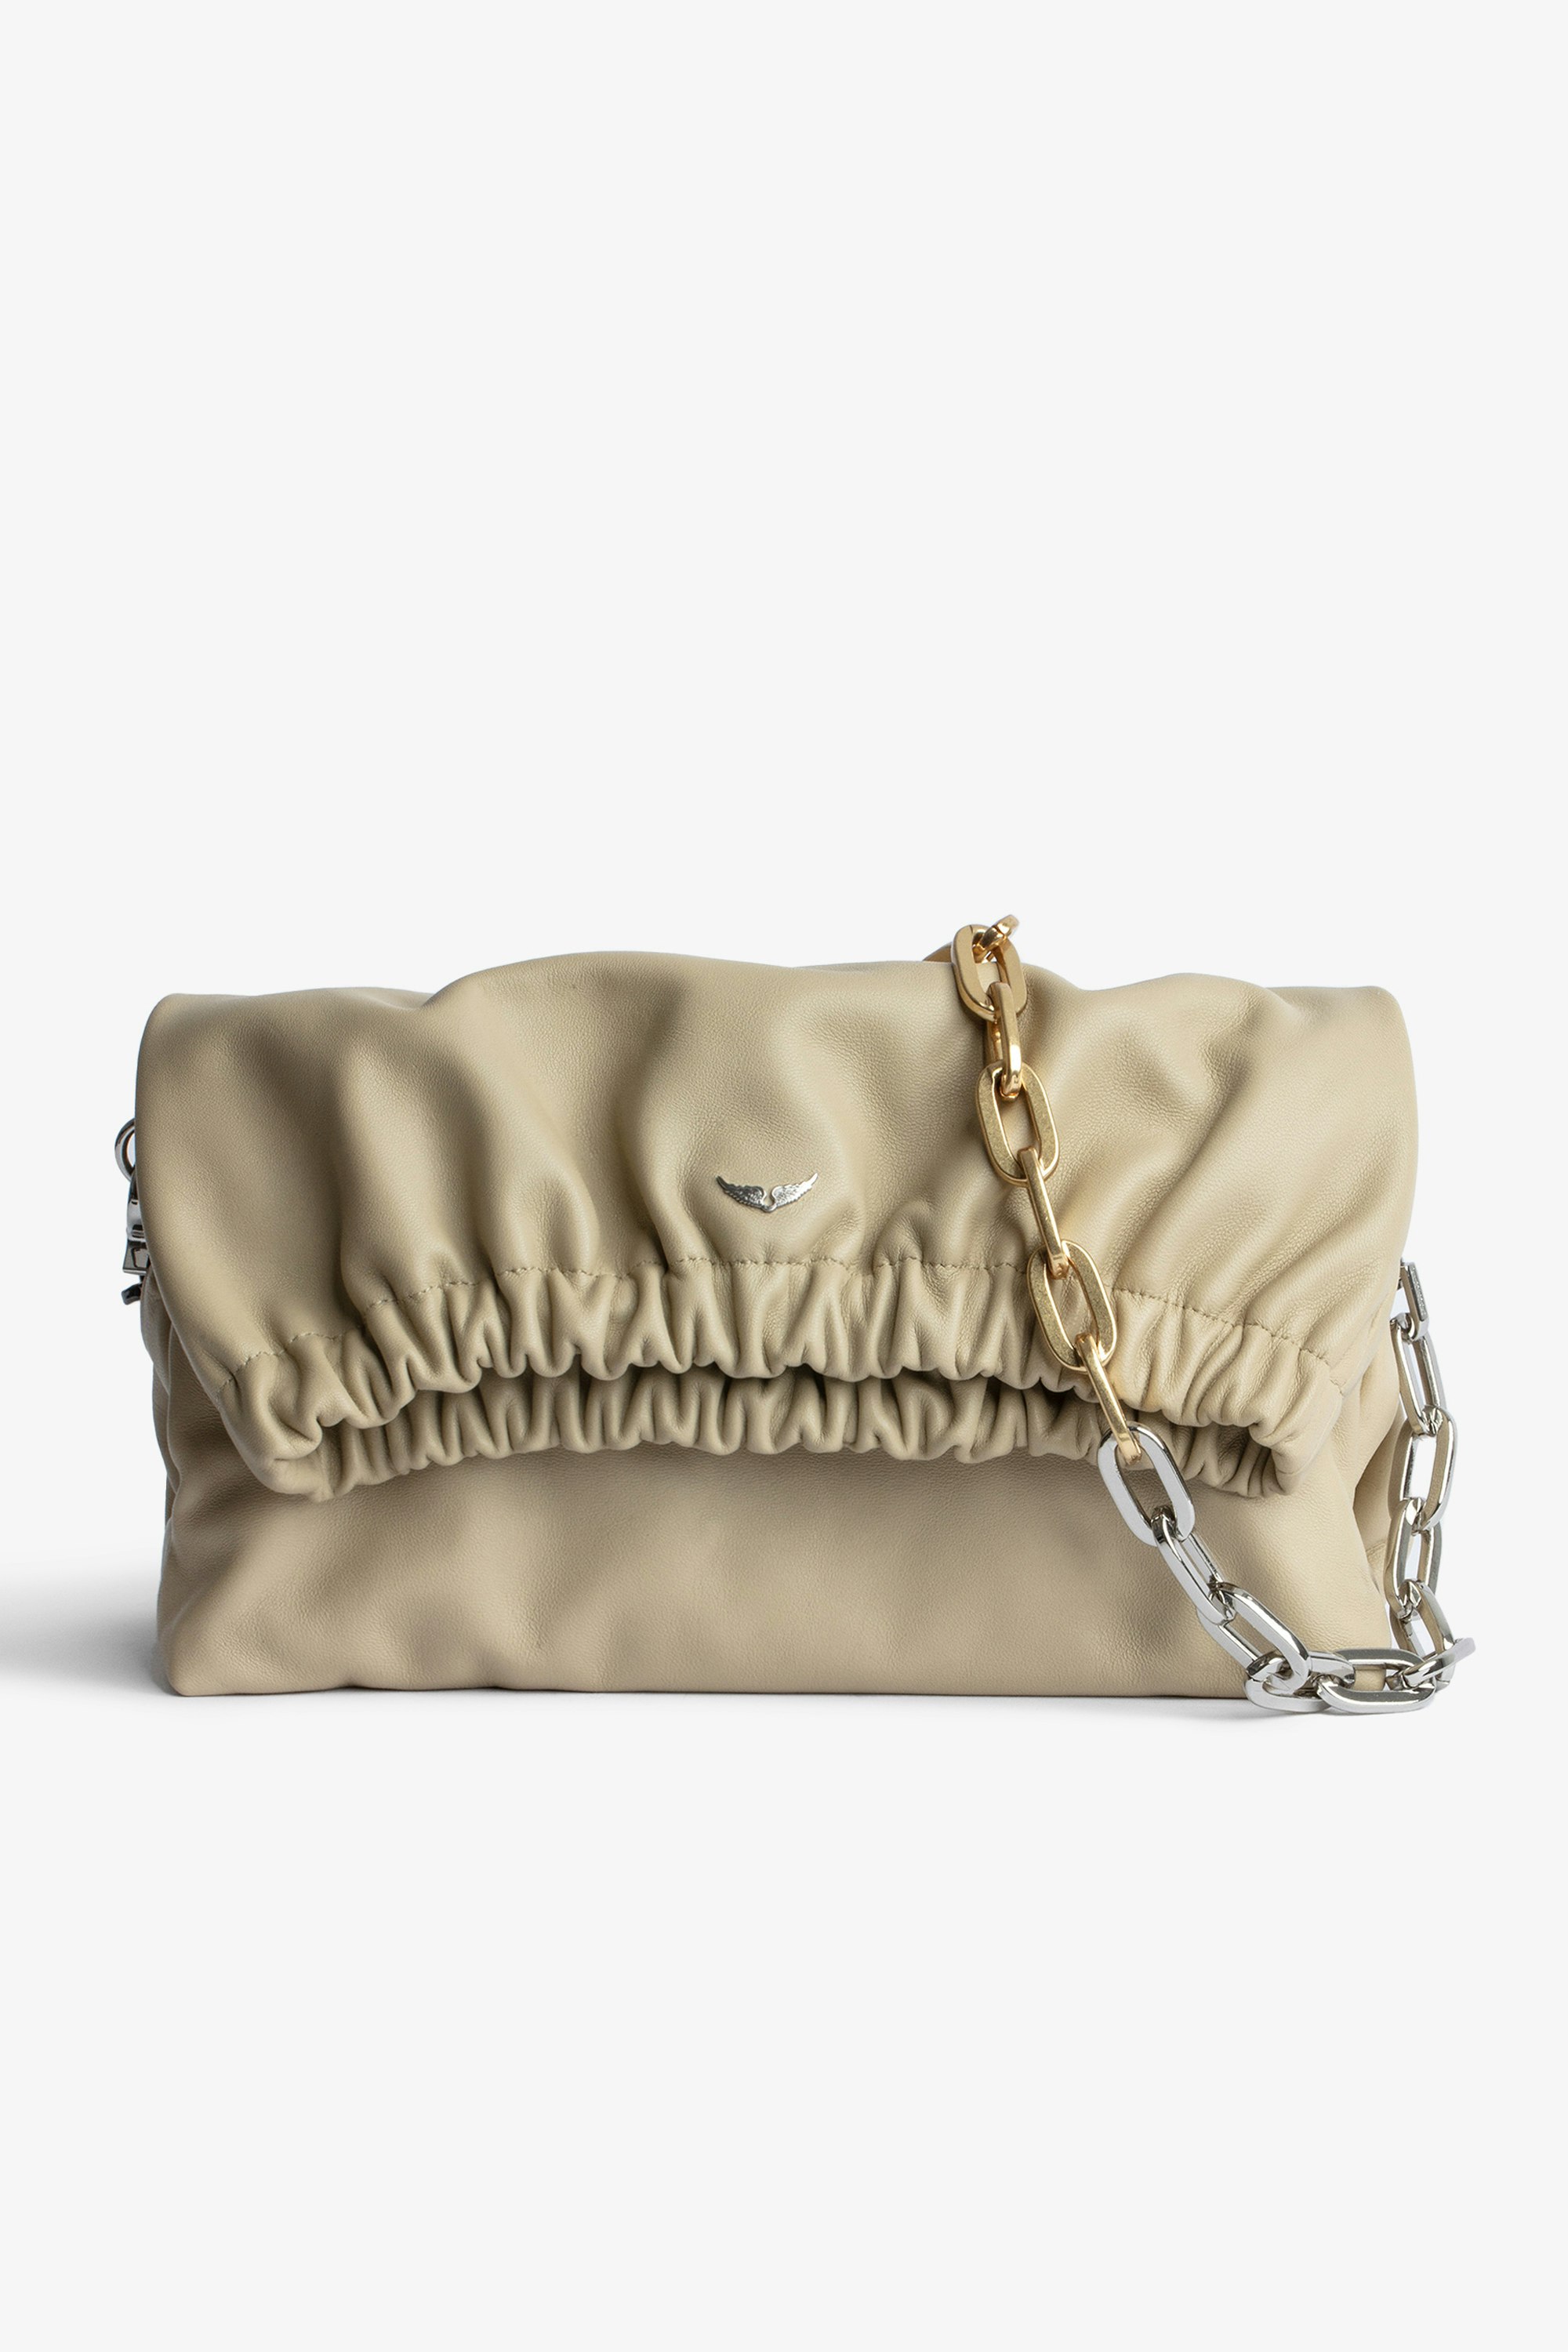 Rockyssime Bag Women’s clutch bag in beige smooth leather with two-tone metal chain